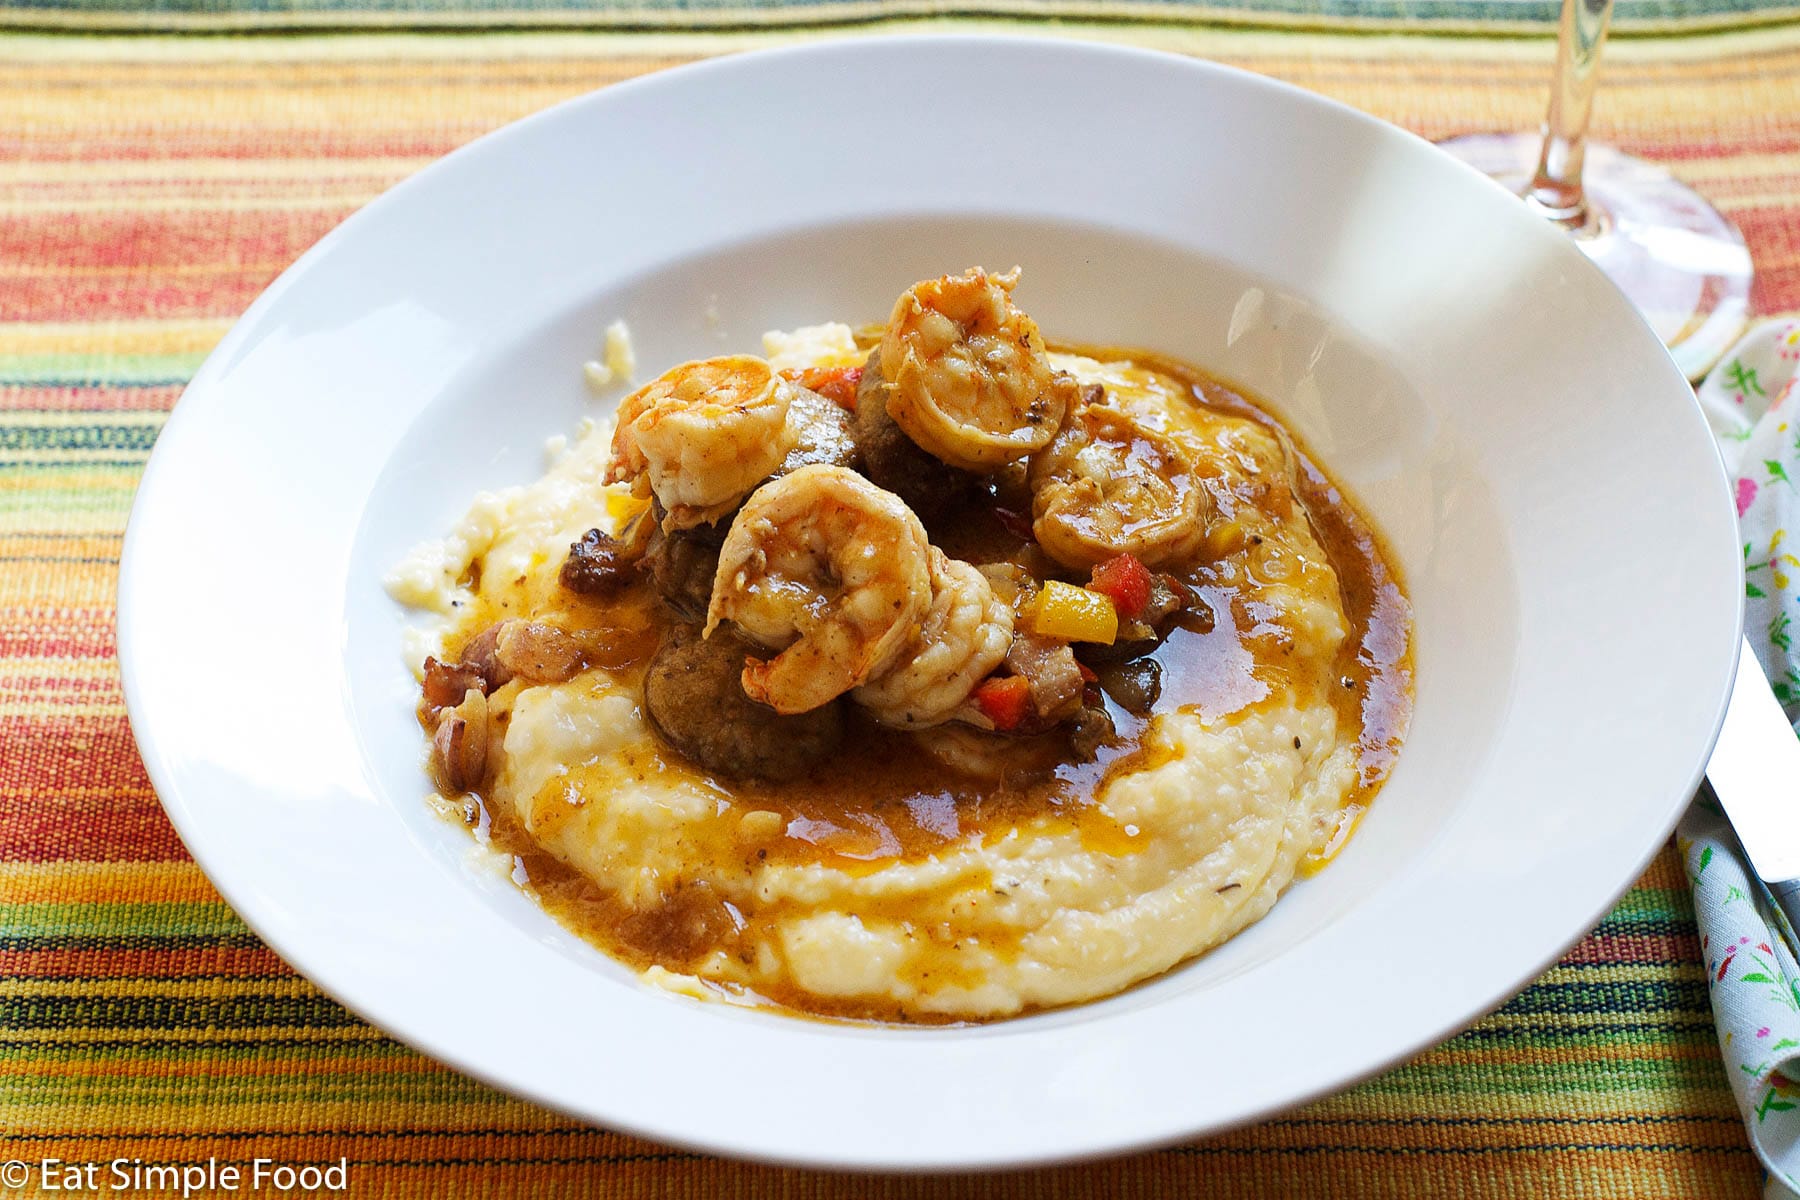 Quick and Easy Blackened Shrimp Recipe (10 minutes) - Grits and